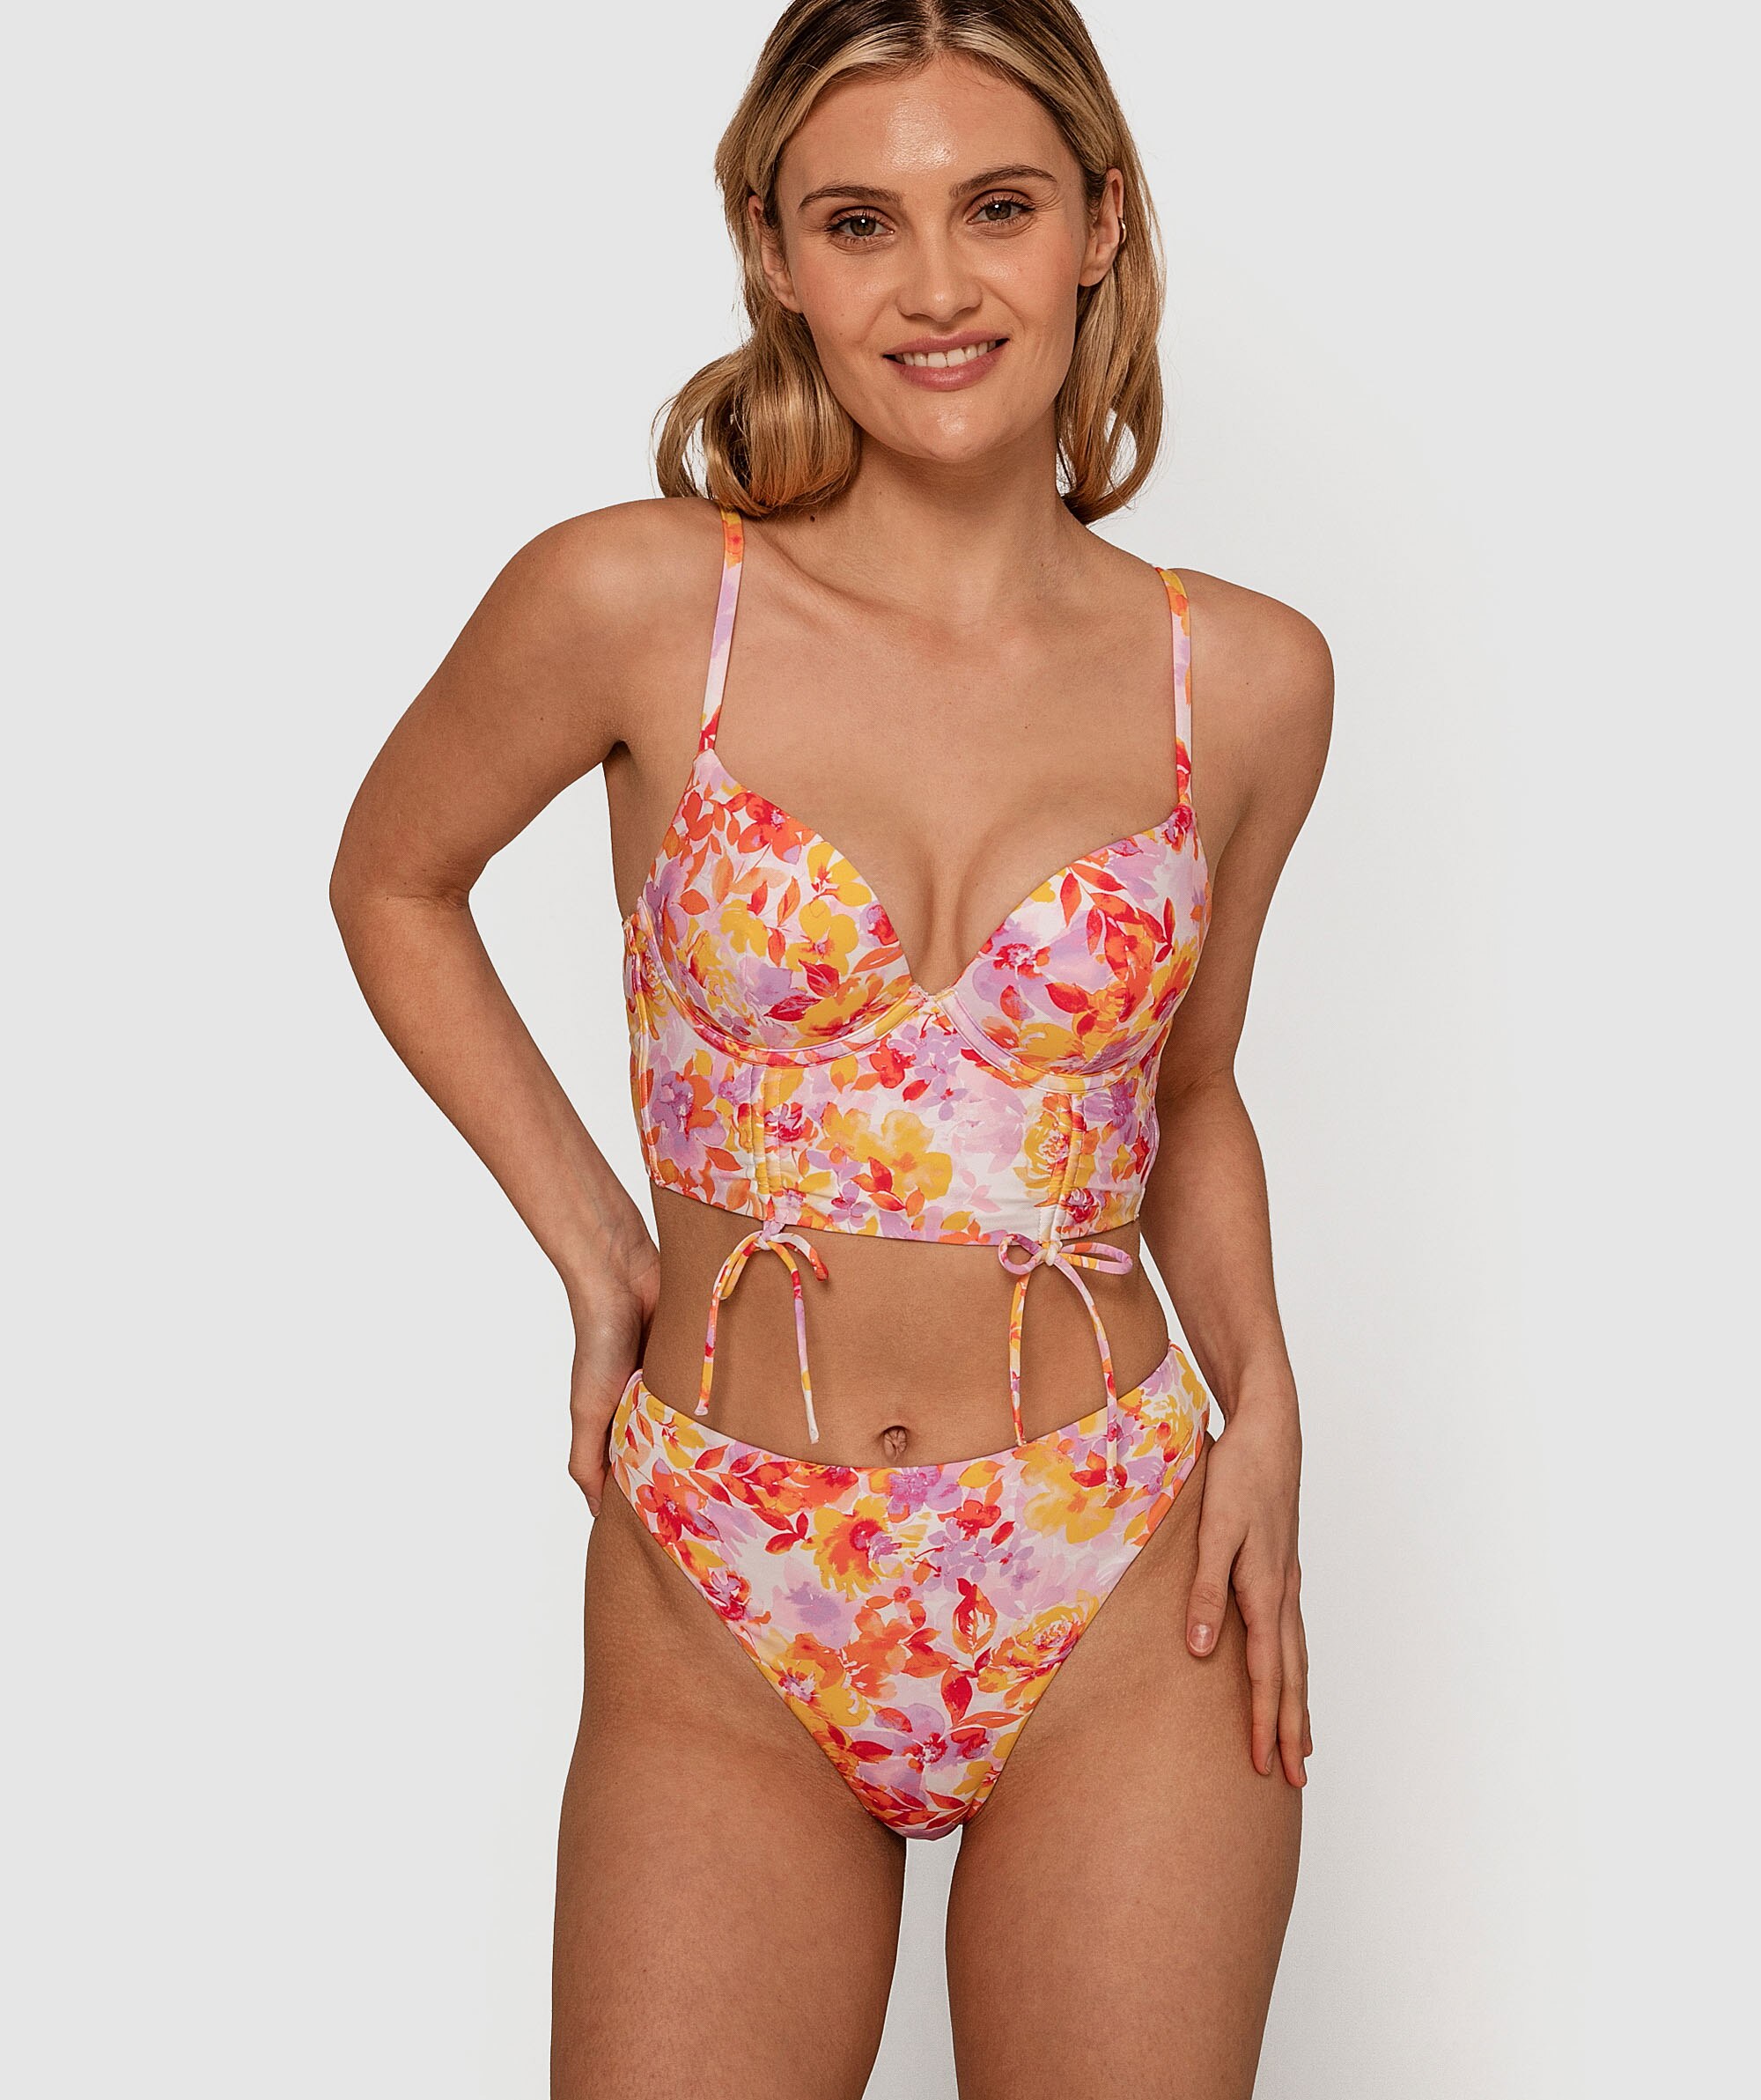 Planet Bliss Swim Vibrant Vacation Push Up Top - Floral Print